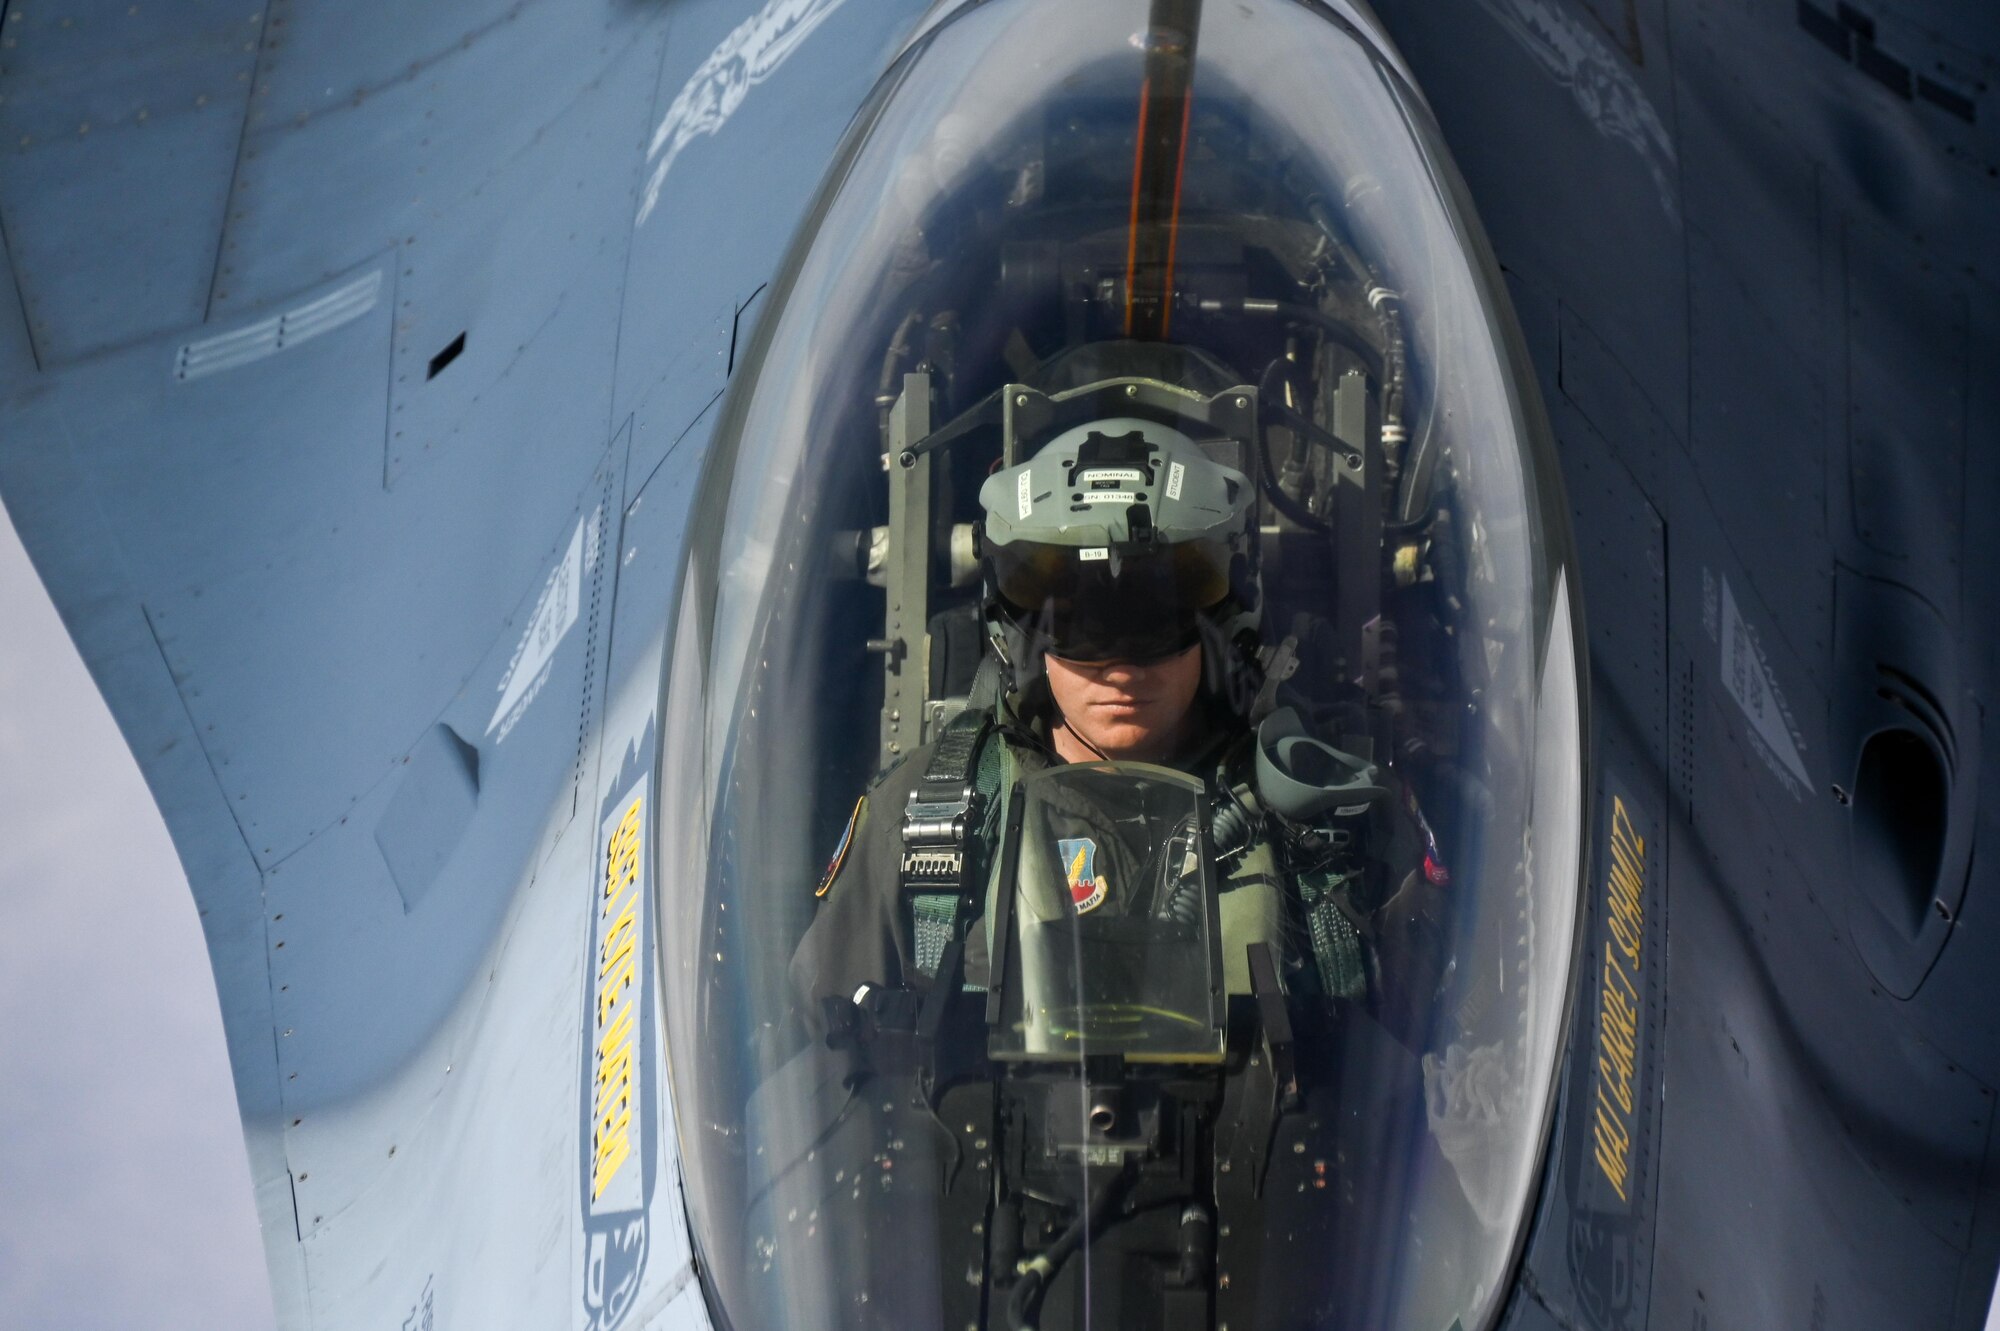 An F-16 Viper Demonstration Team pilot refuels with a KC-135 Stratotanker from the 465th Air Refueling Squadron assigned to Tinker Air Force Base, Oklahoma, March 8, 2021. The F-16 team from Shaw Air Force Base, South Carolina, is assigned to Air Combat Command received fuel from the Okies during their flight back to their home station after performing at an air show. (U.S. Air Force photo by Senior Airman Mary Begy)